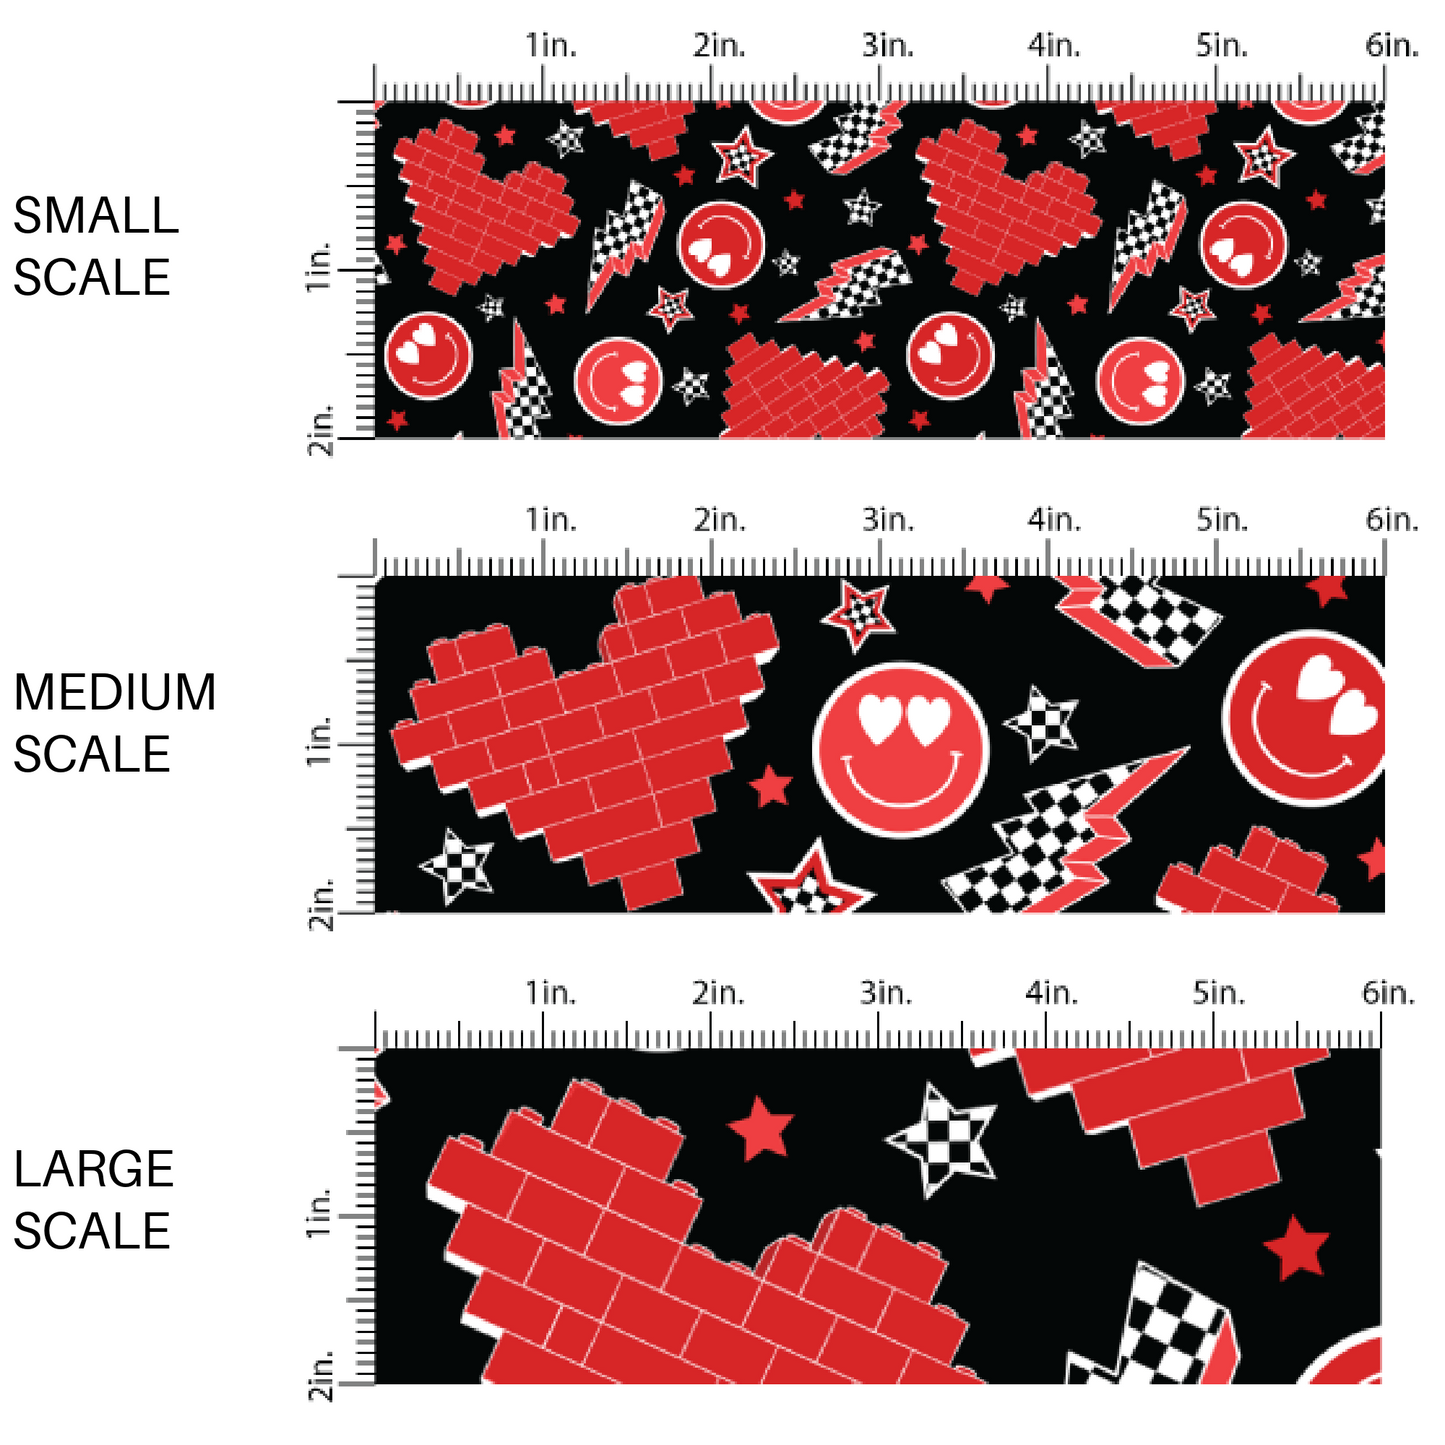 Red Hearts, Smiley Faces, and Lightning Bolts on Black Valentine's Day Fabric by the Yard scaled image guide.